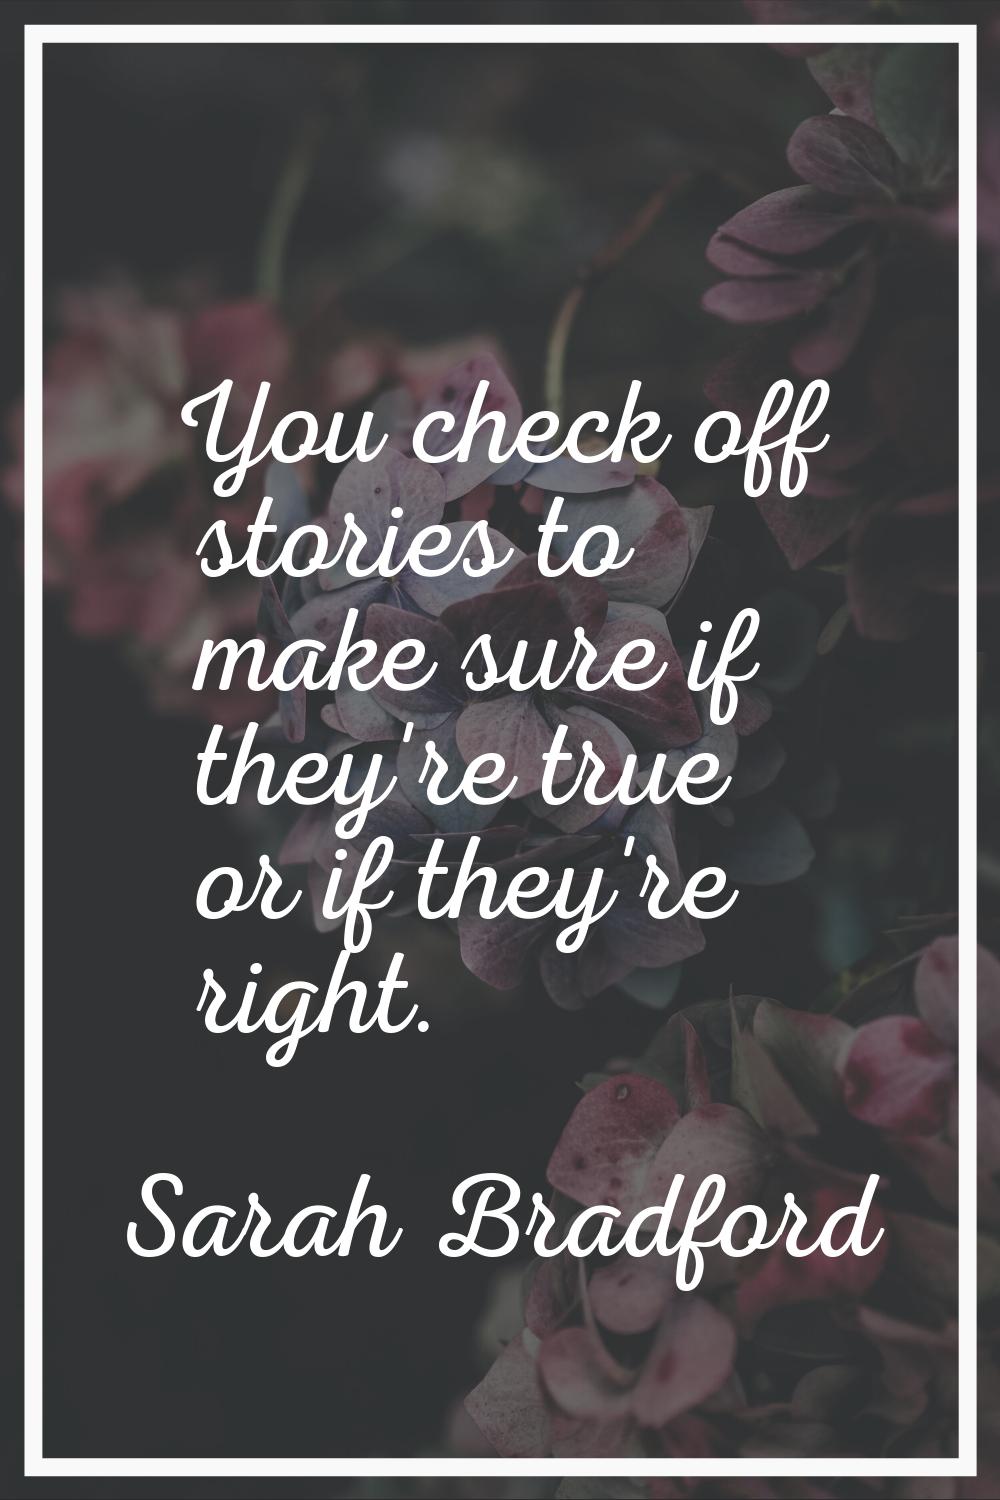 You check off stories to make sure if they're true or if they're right.